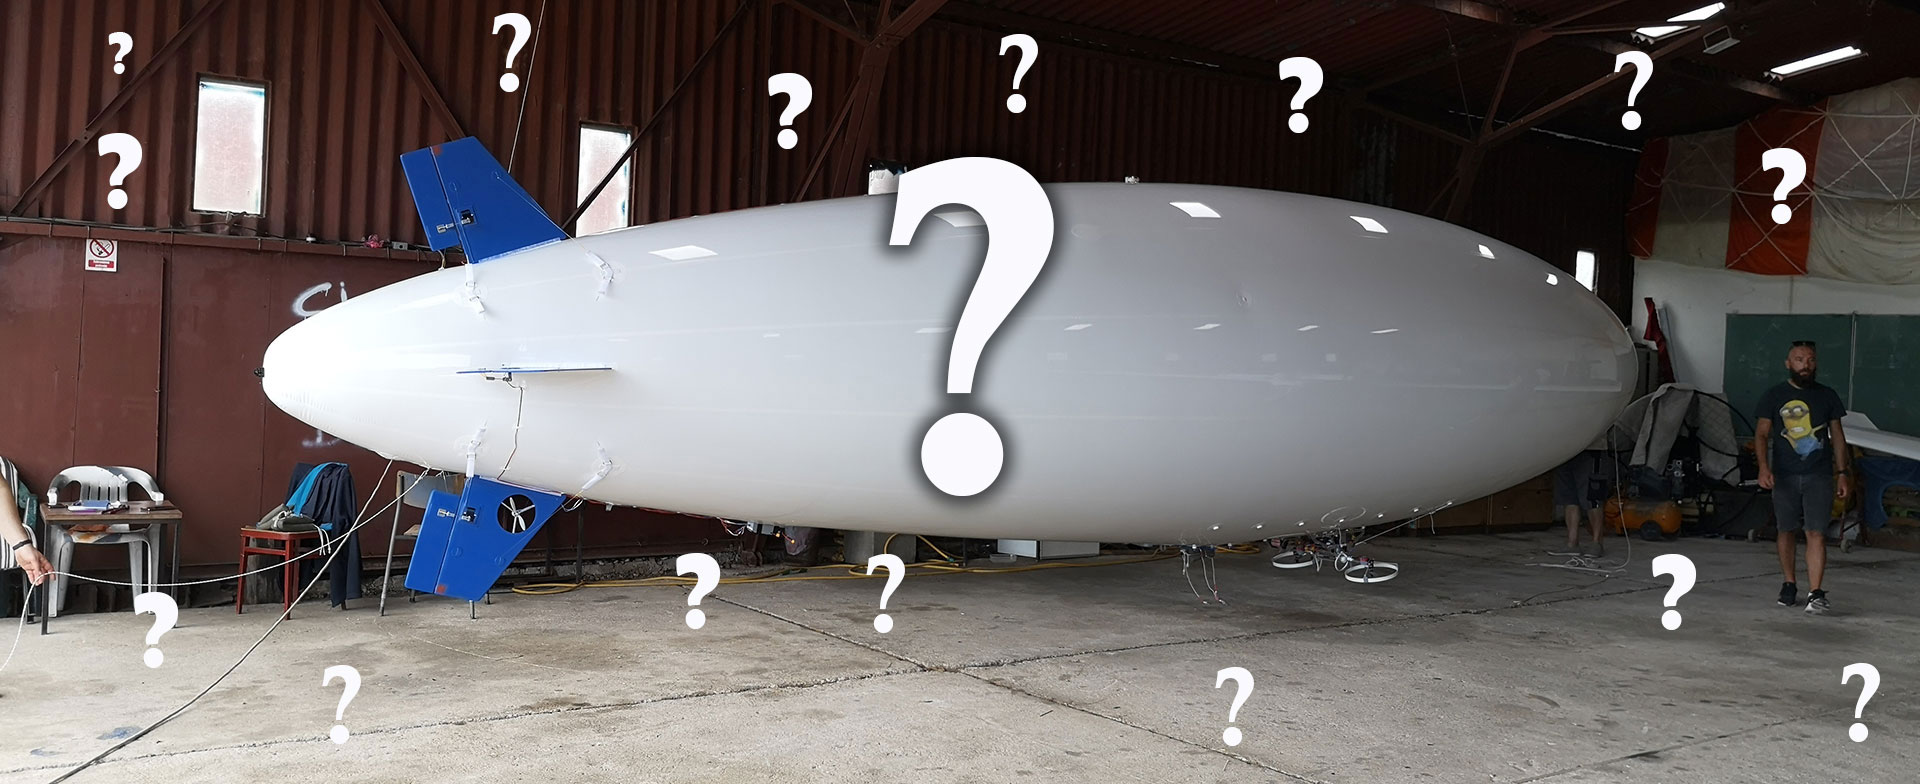 Frequently-asked-questions-about-Blimps-and-Aerostats